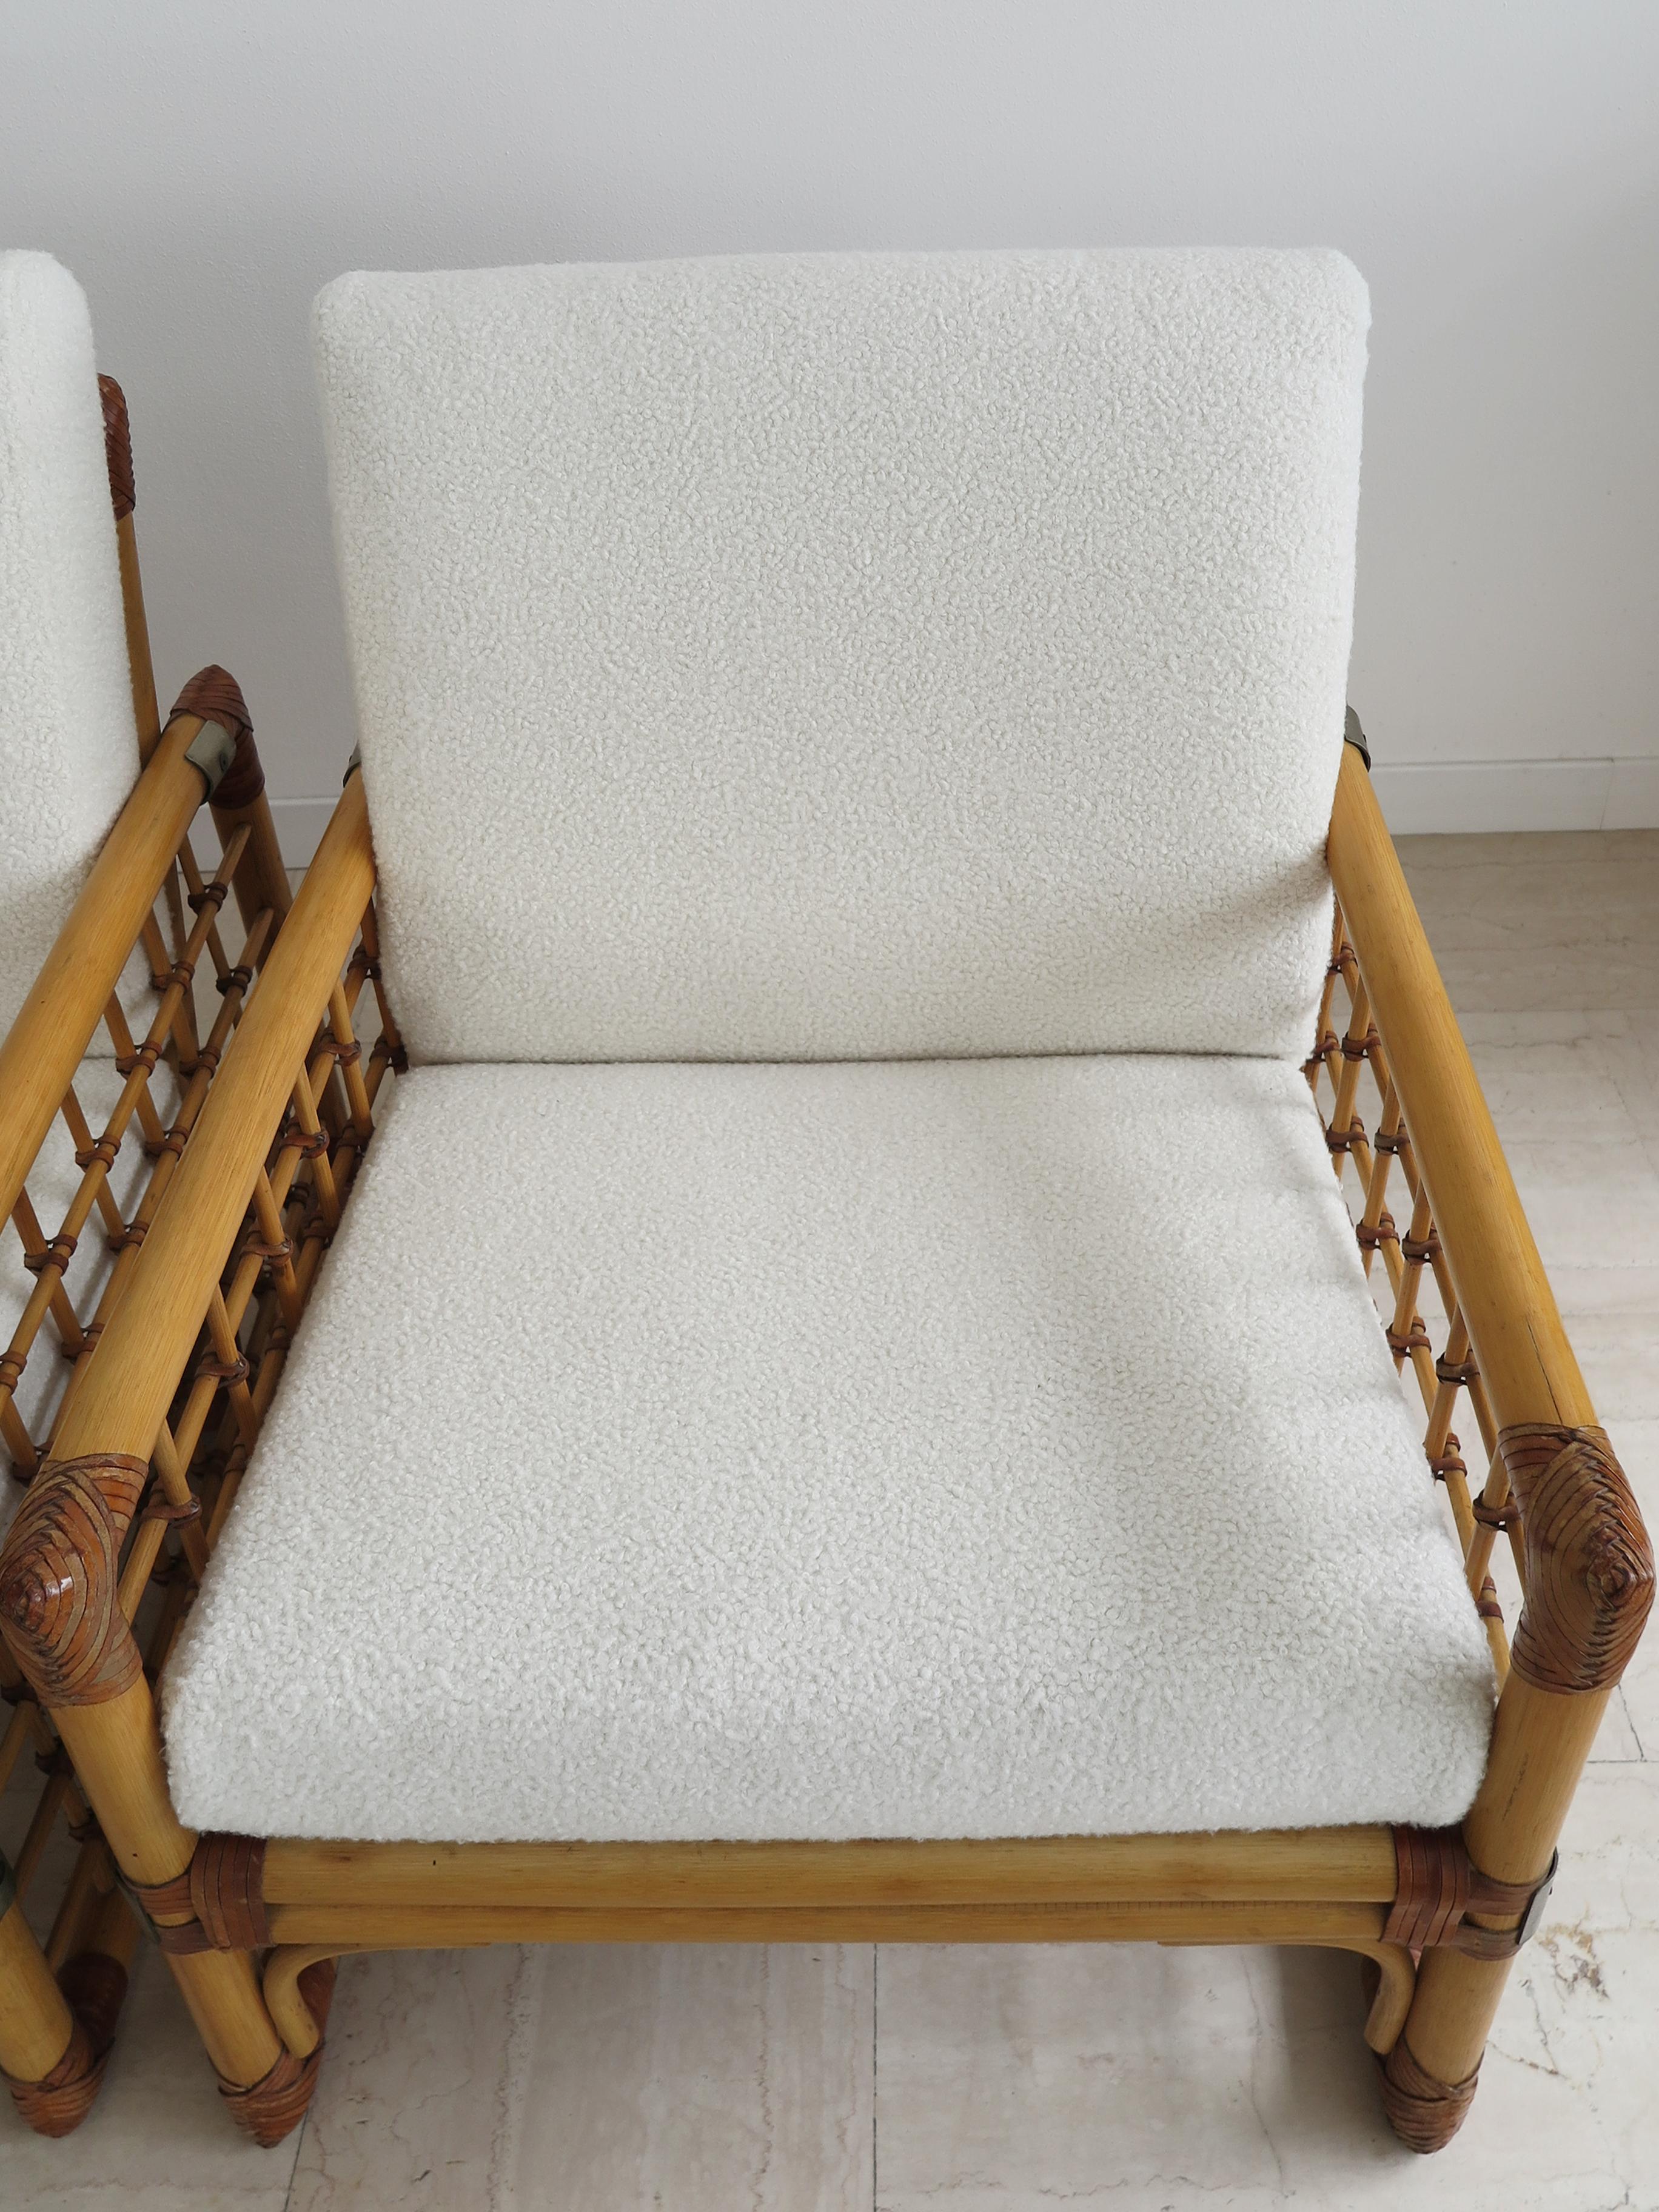 Late 20th Century Bamboo, Indian Cane and Frabric Italian Armchairs, 1970s For Sale